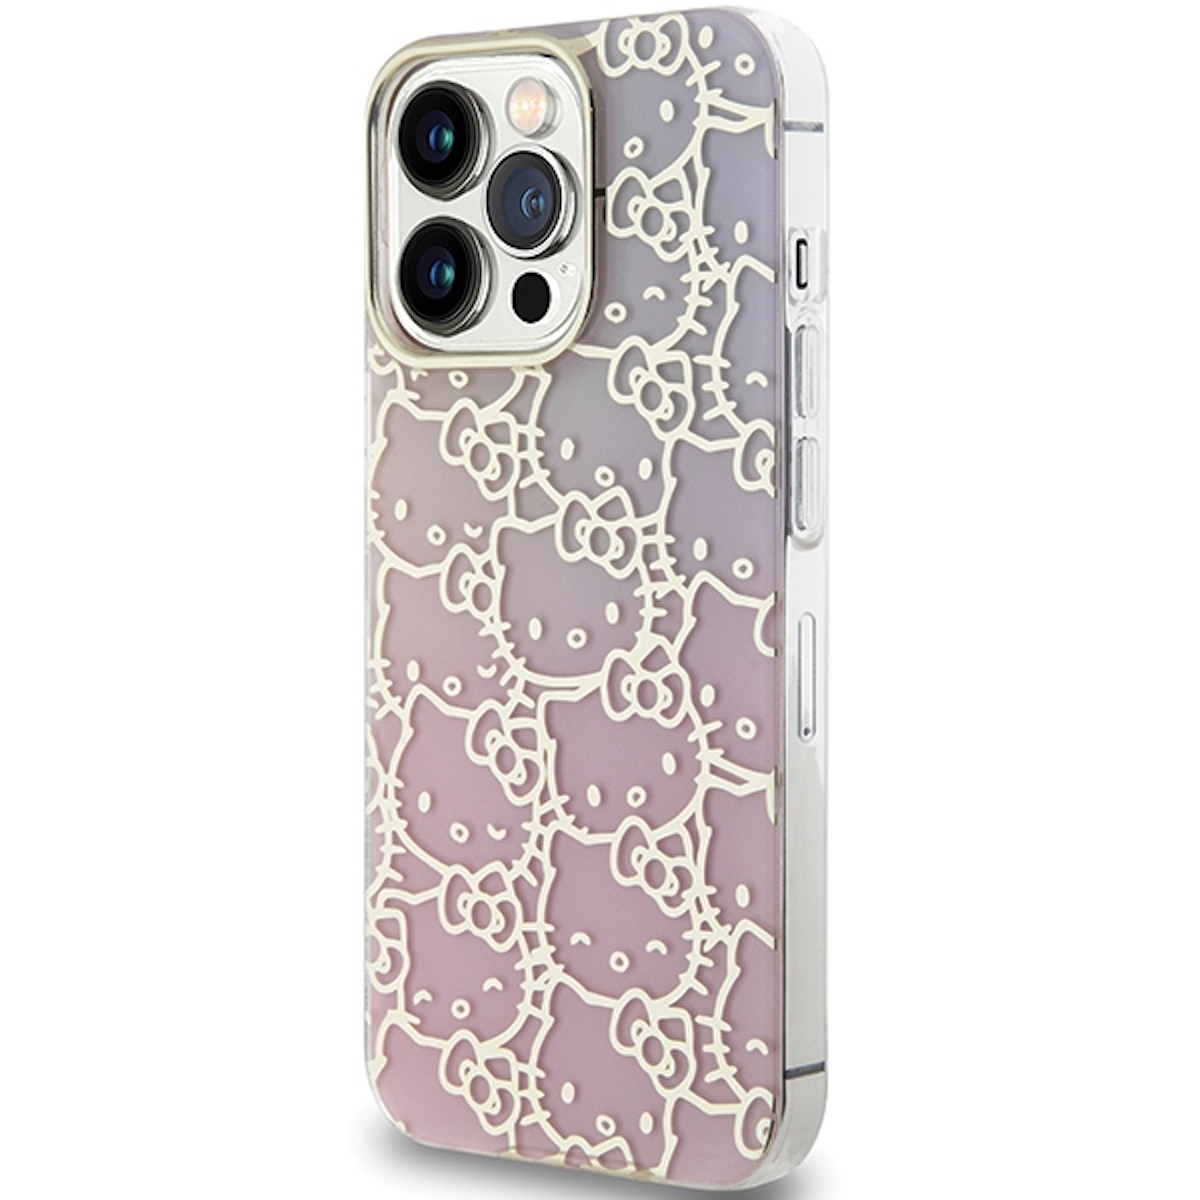 Cover Apple, BY iPhone Rosa 15 Max, Hardcase Cover Silikon HELLO Pro CHEFMADE Design, Schutzhülle Backcover, KITTY